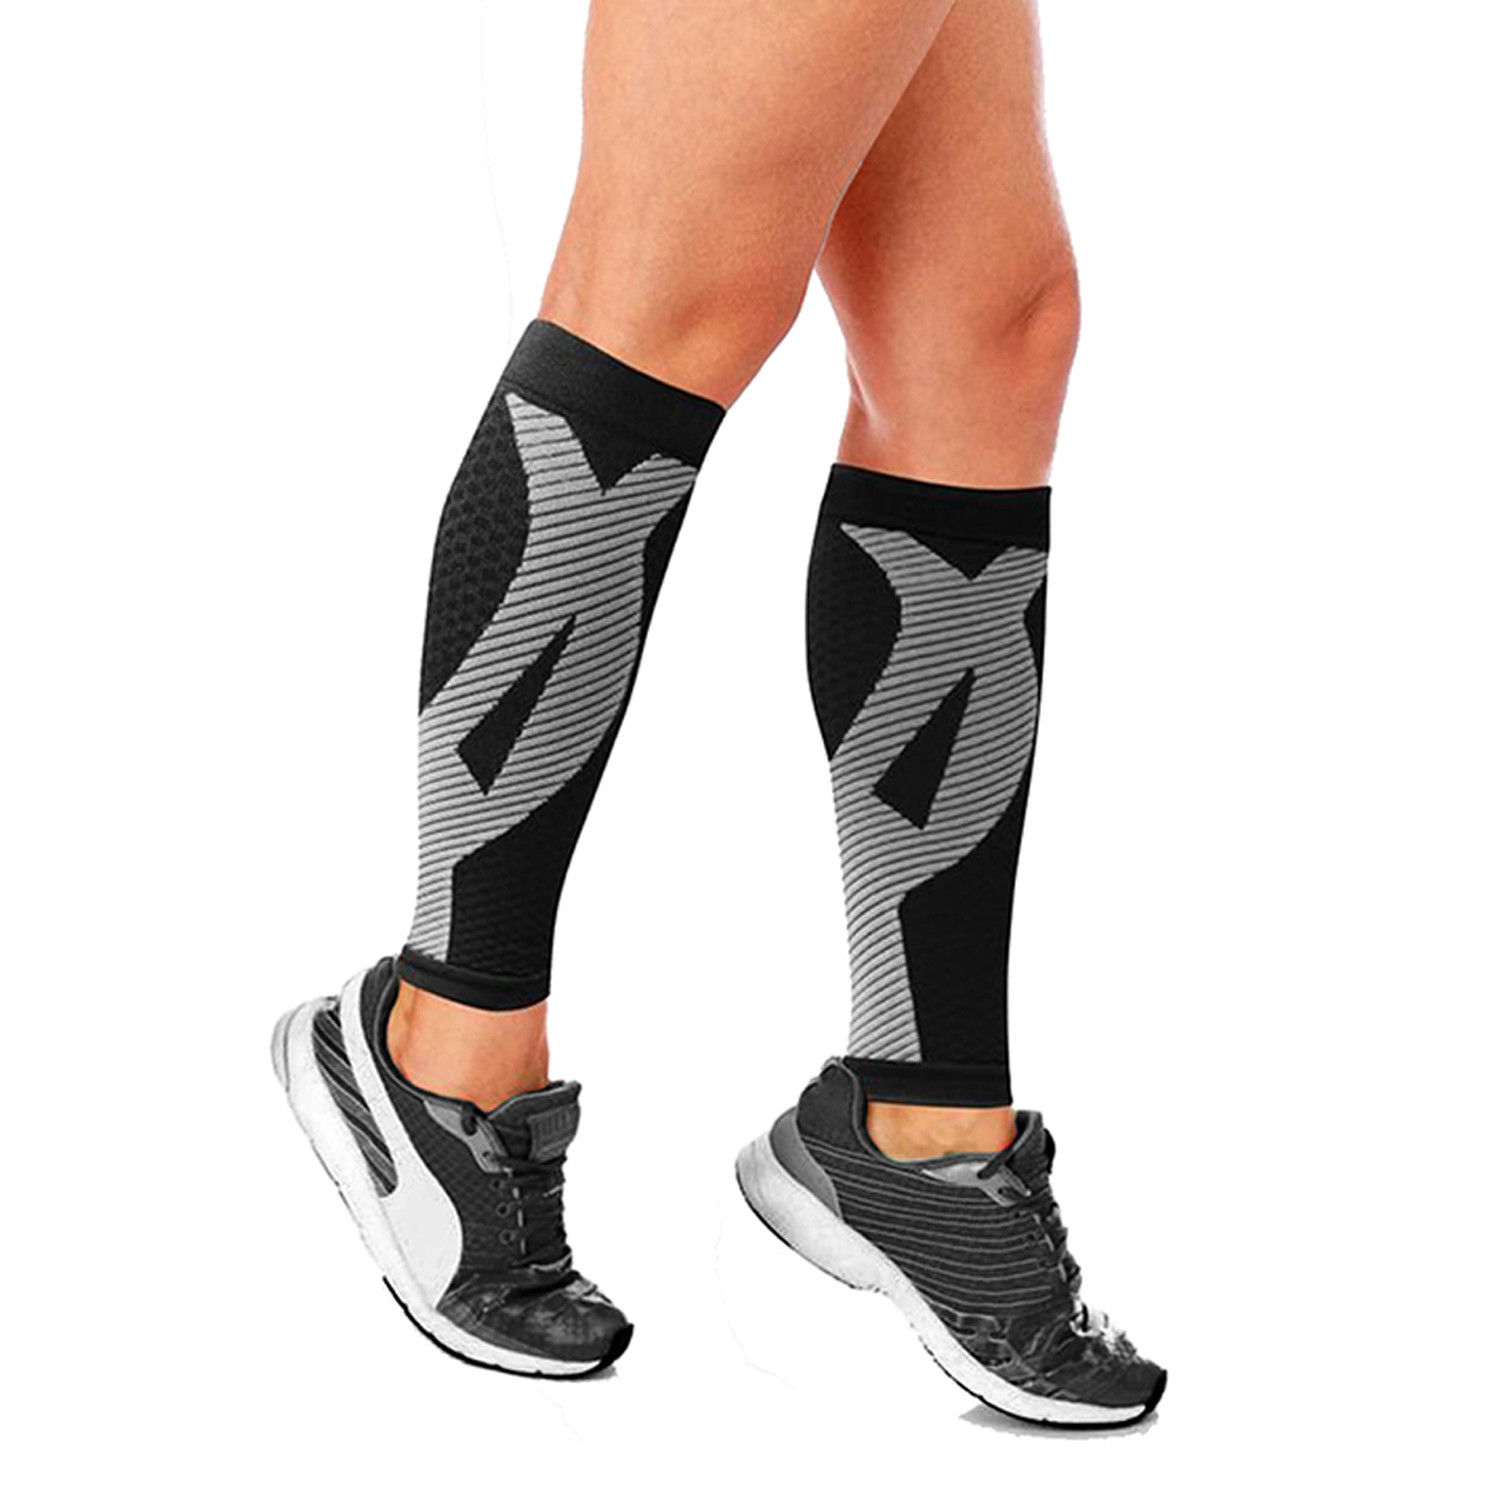 2.0 Copper-Infused Calf Compression Sleeves // 1-Pair // Black (S/M ...